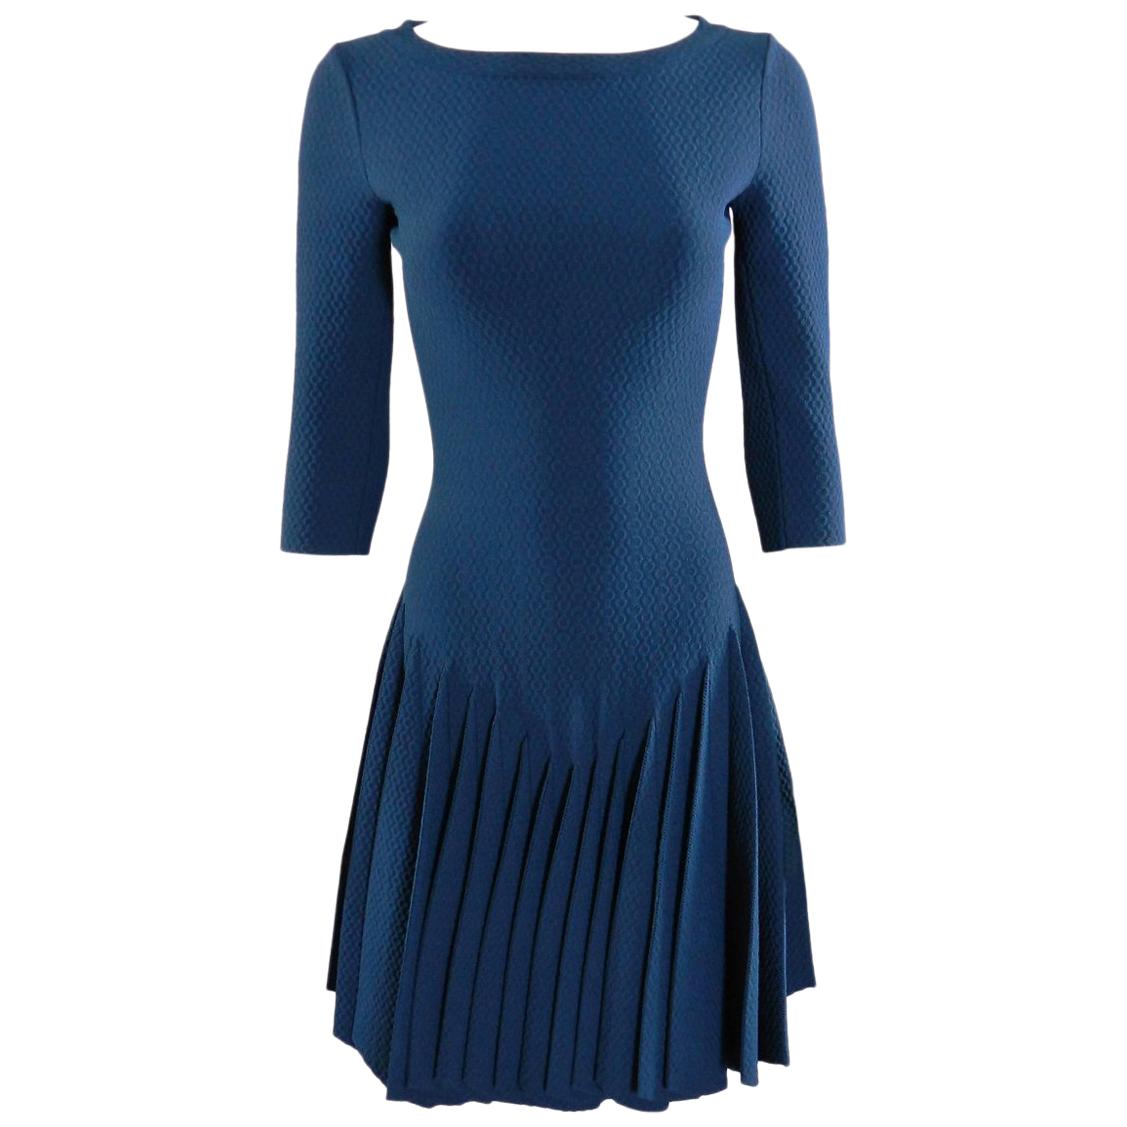 Alaia Prussian Blue Stretch Knit Fit and Flare Dress - 38